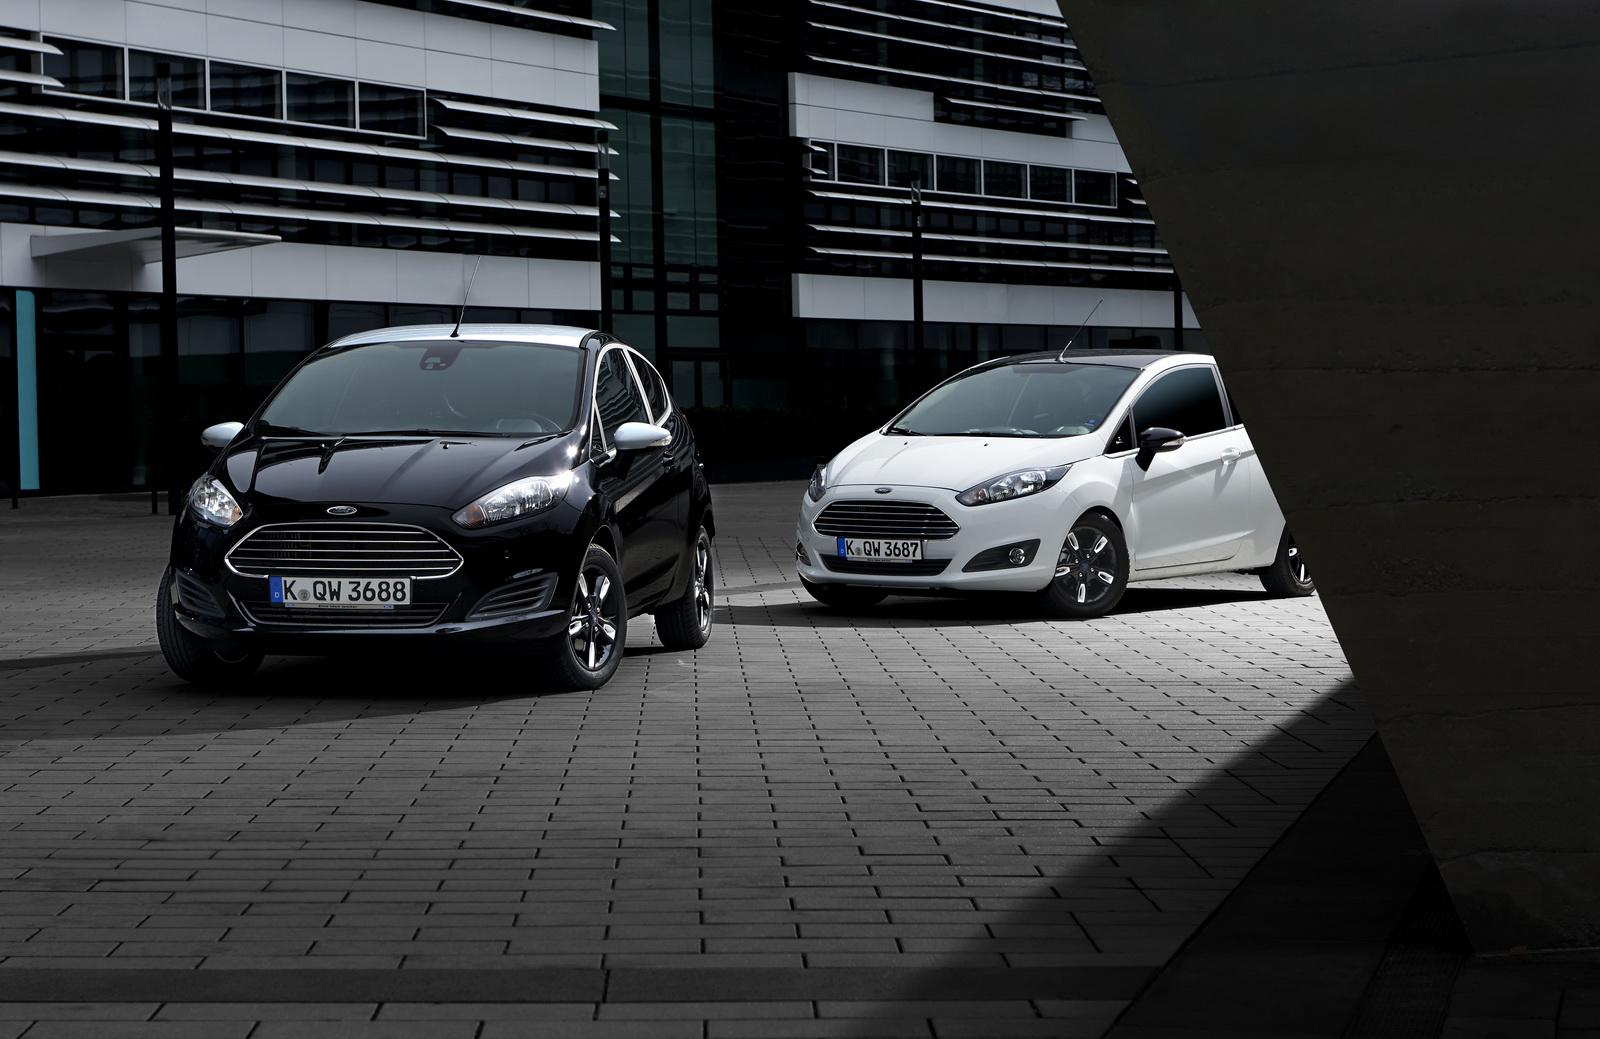 Ford Fiesta Black and White